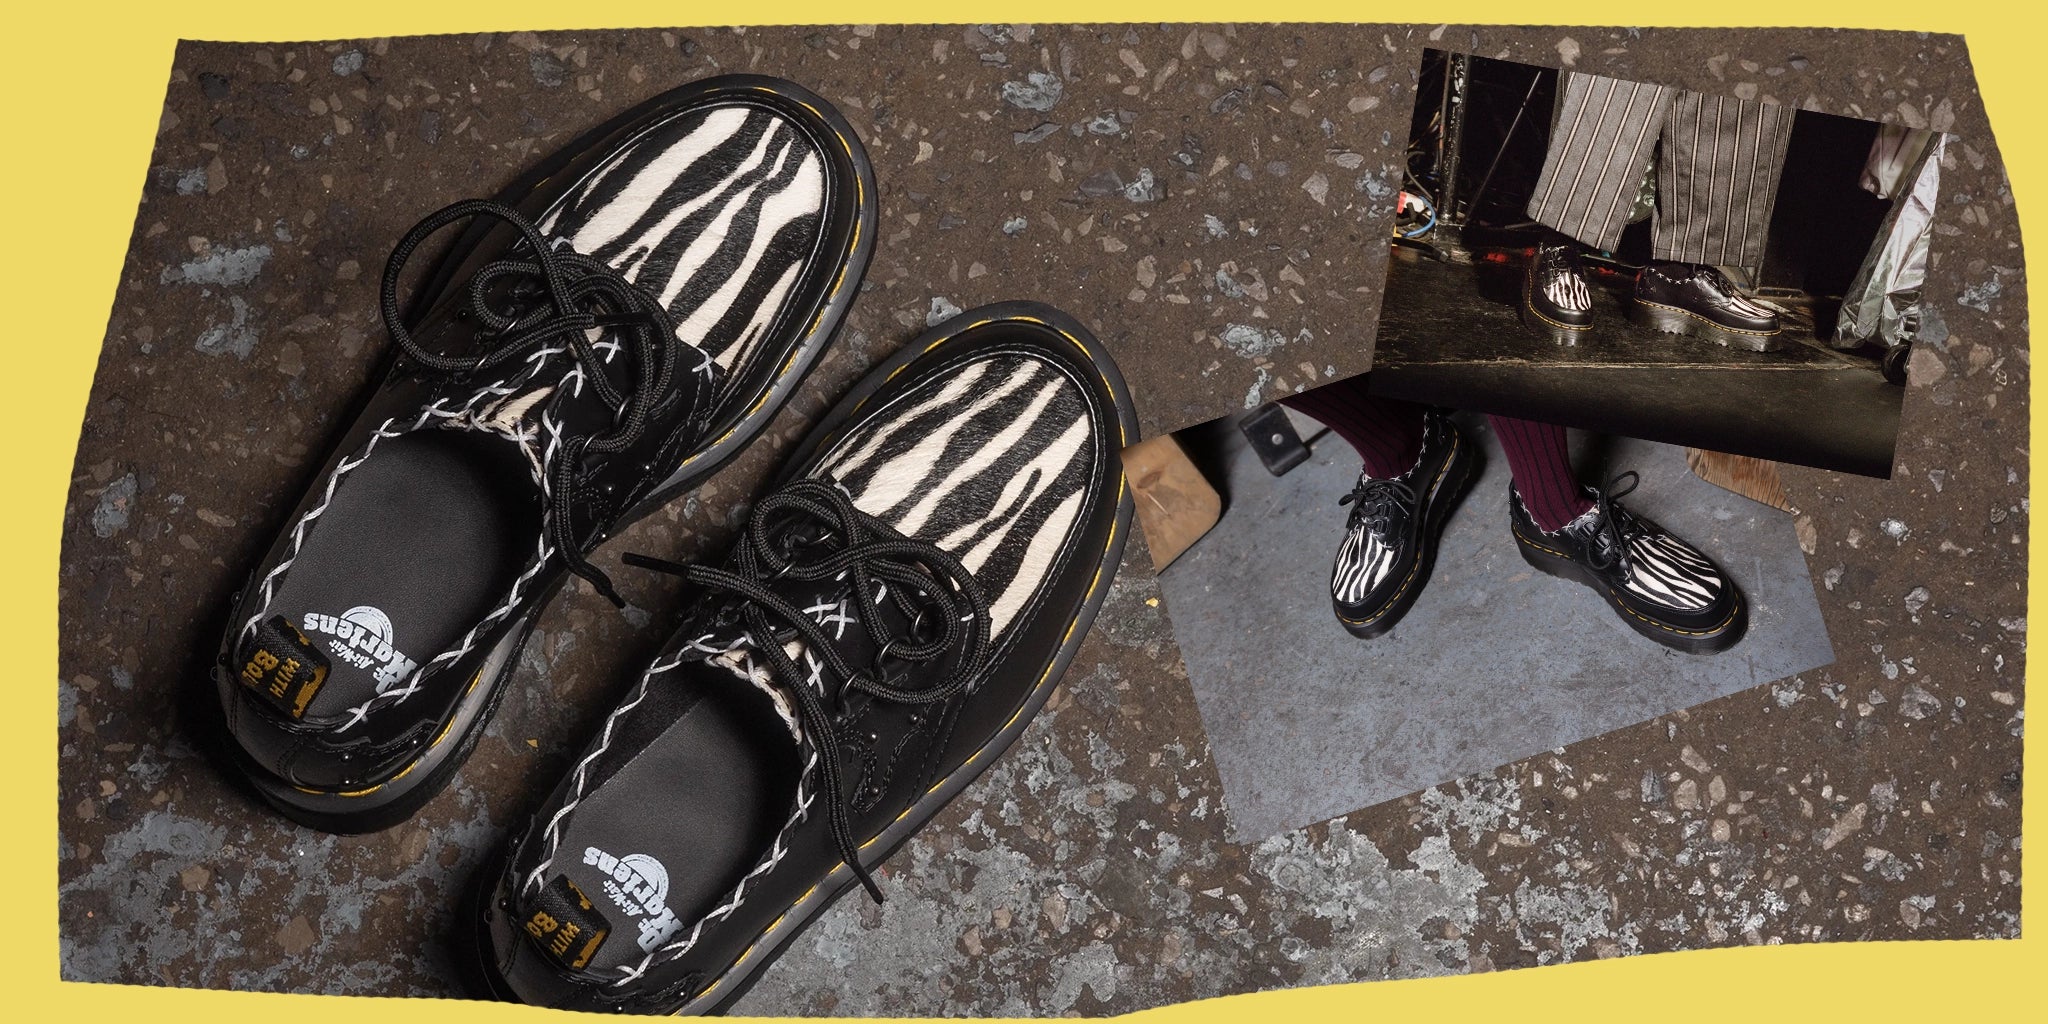 Dr. Martens Ramsey - first come, first serve